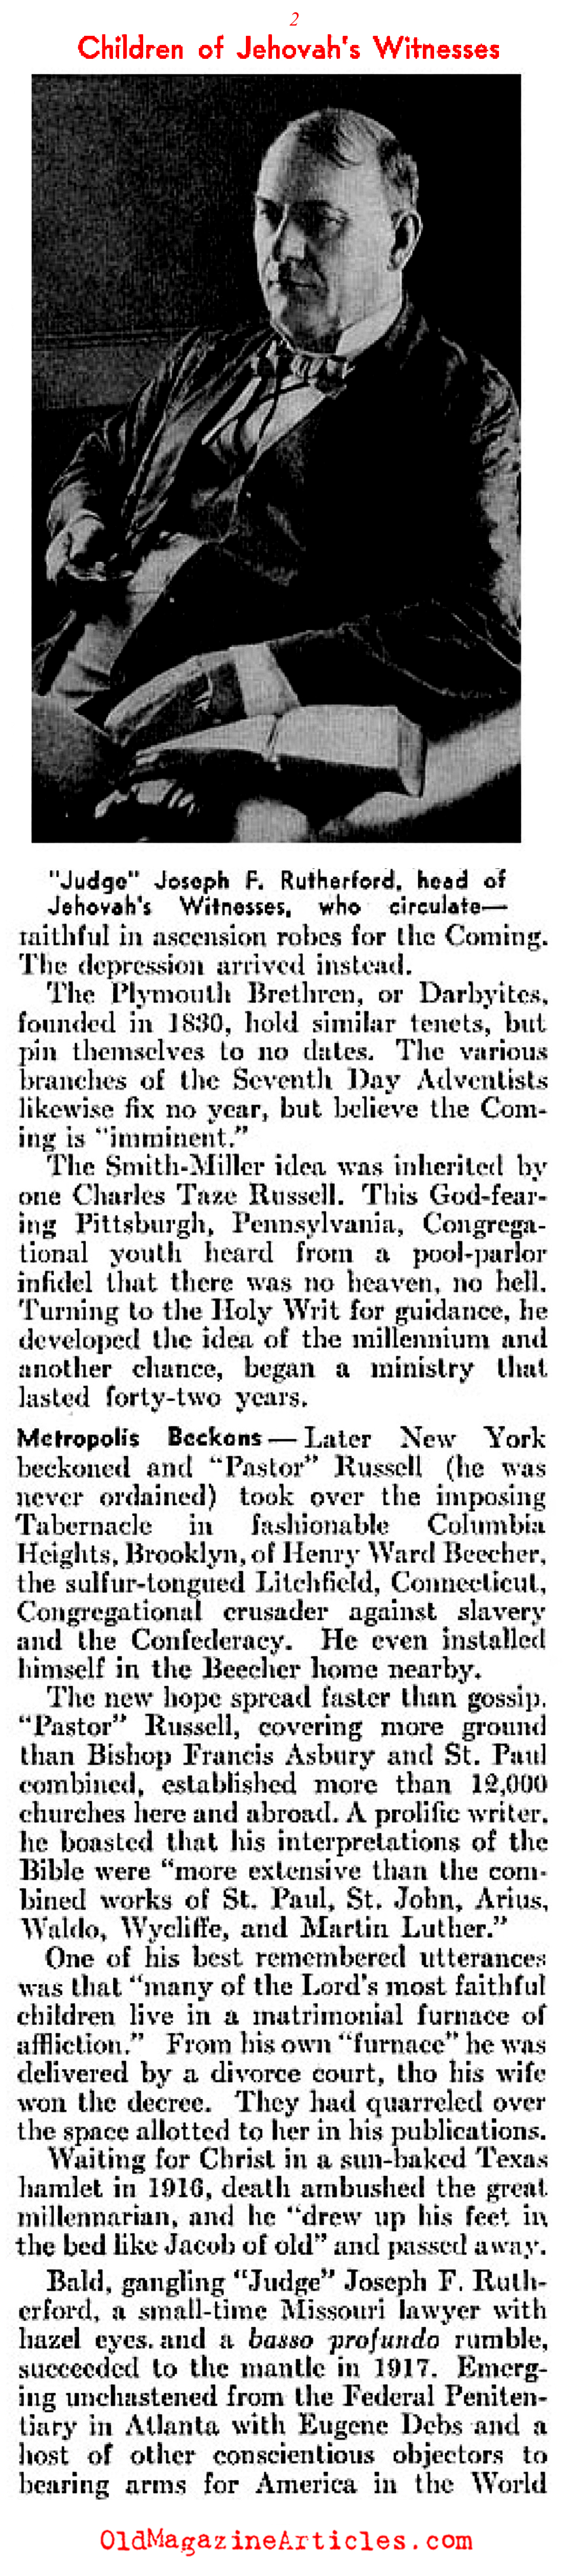 The Persecution of Jehovah’s Witnesses (Literary Digest, 1936)